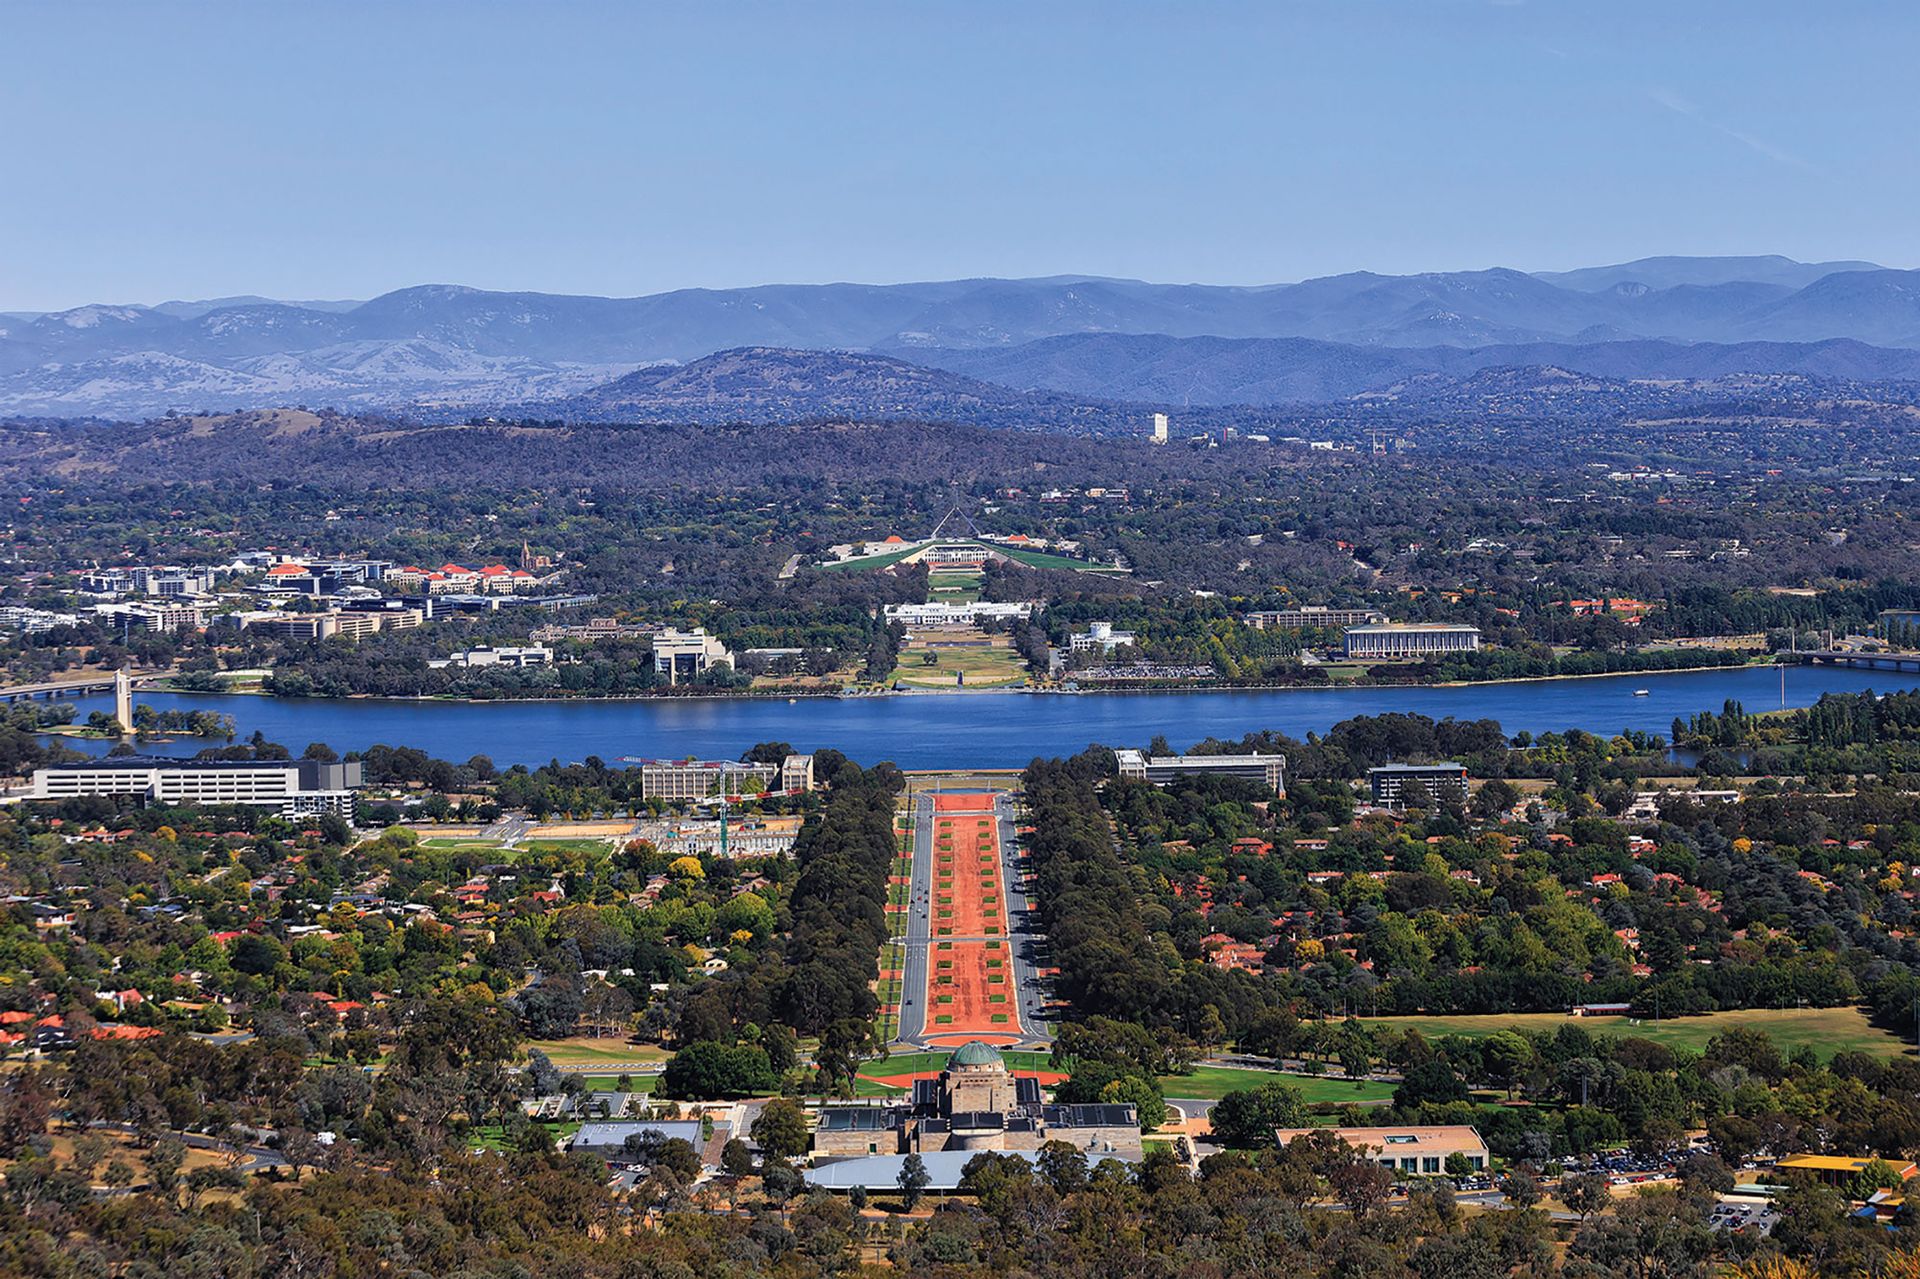 Ngurra will be situated on the shore of Lake Burley Griffin alongside key national institutions in Canberra, between Parliament House and the Australian War Memorial Taras Vyshnya/Alamy